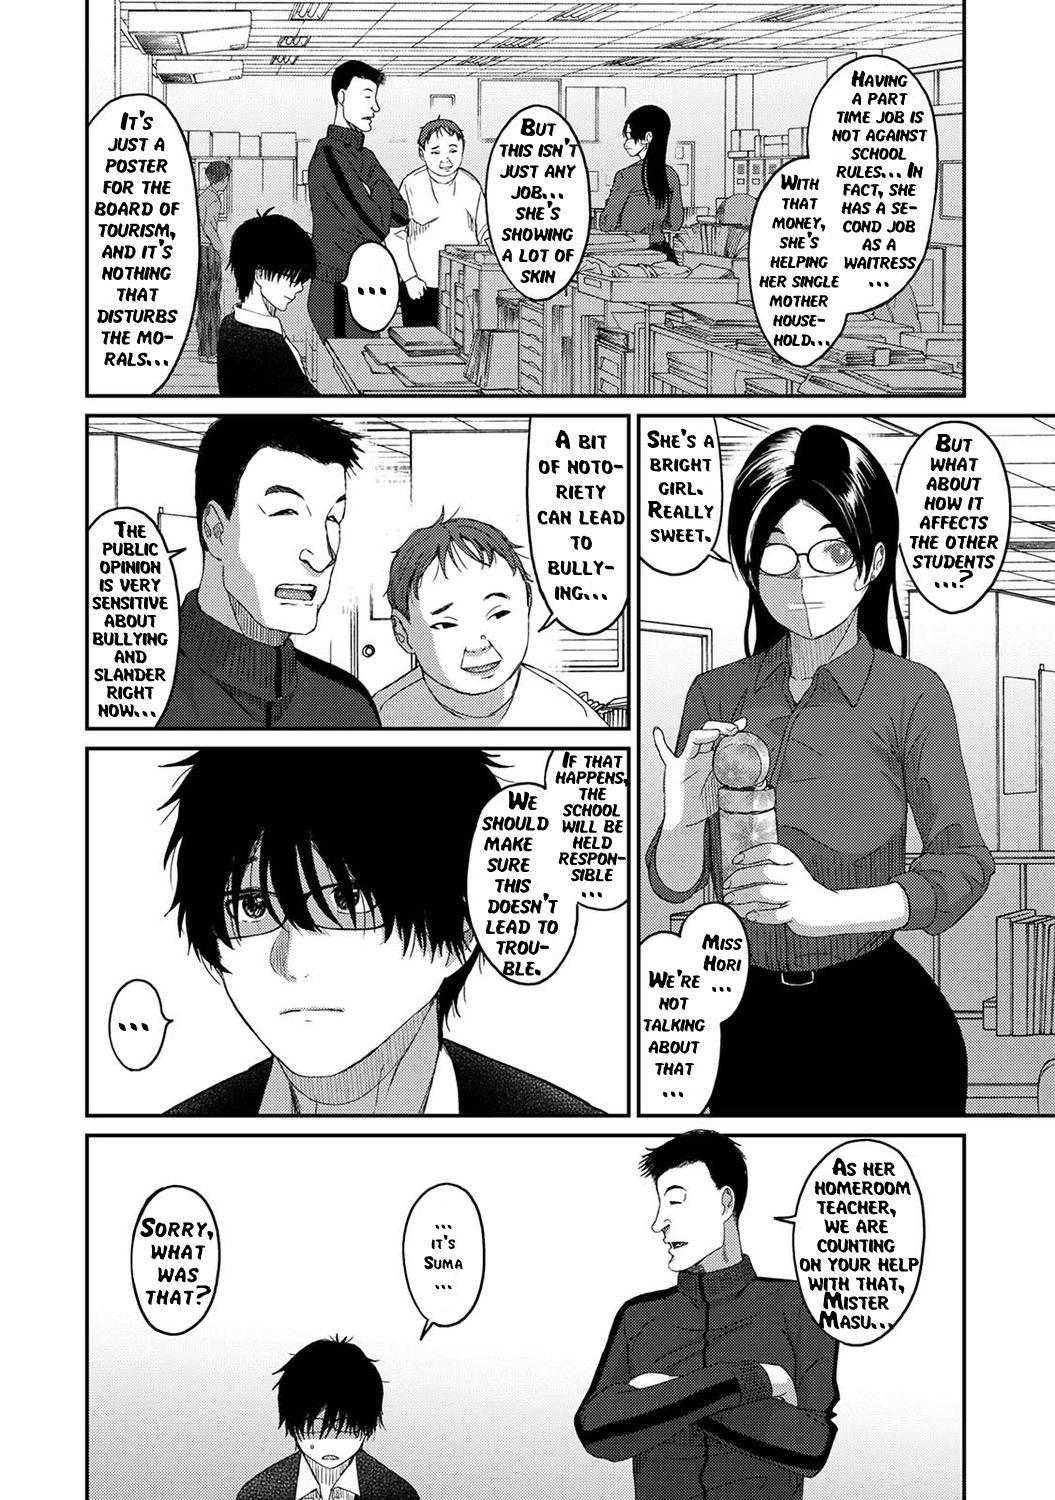 Weird Itaiamai - Chapter 1 Comedor - Page 7